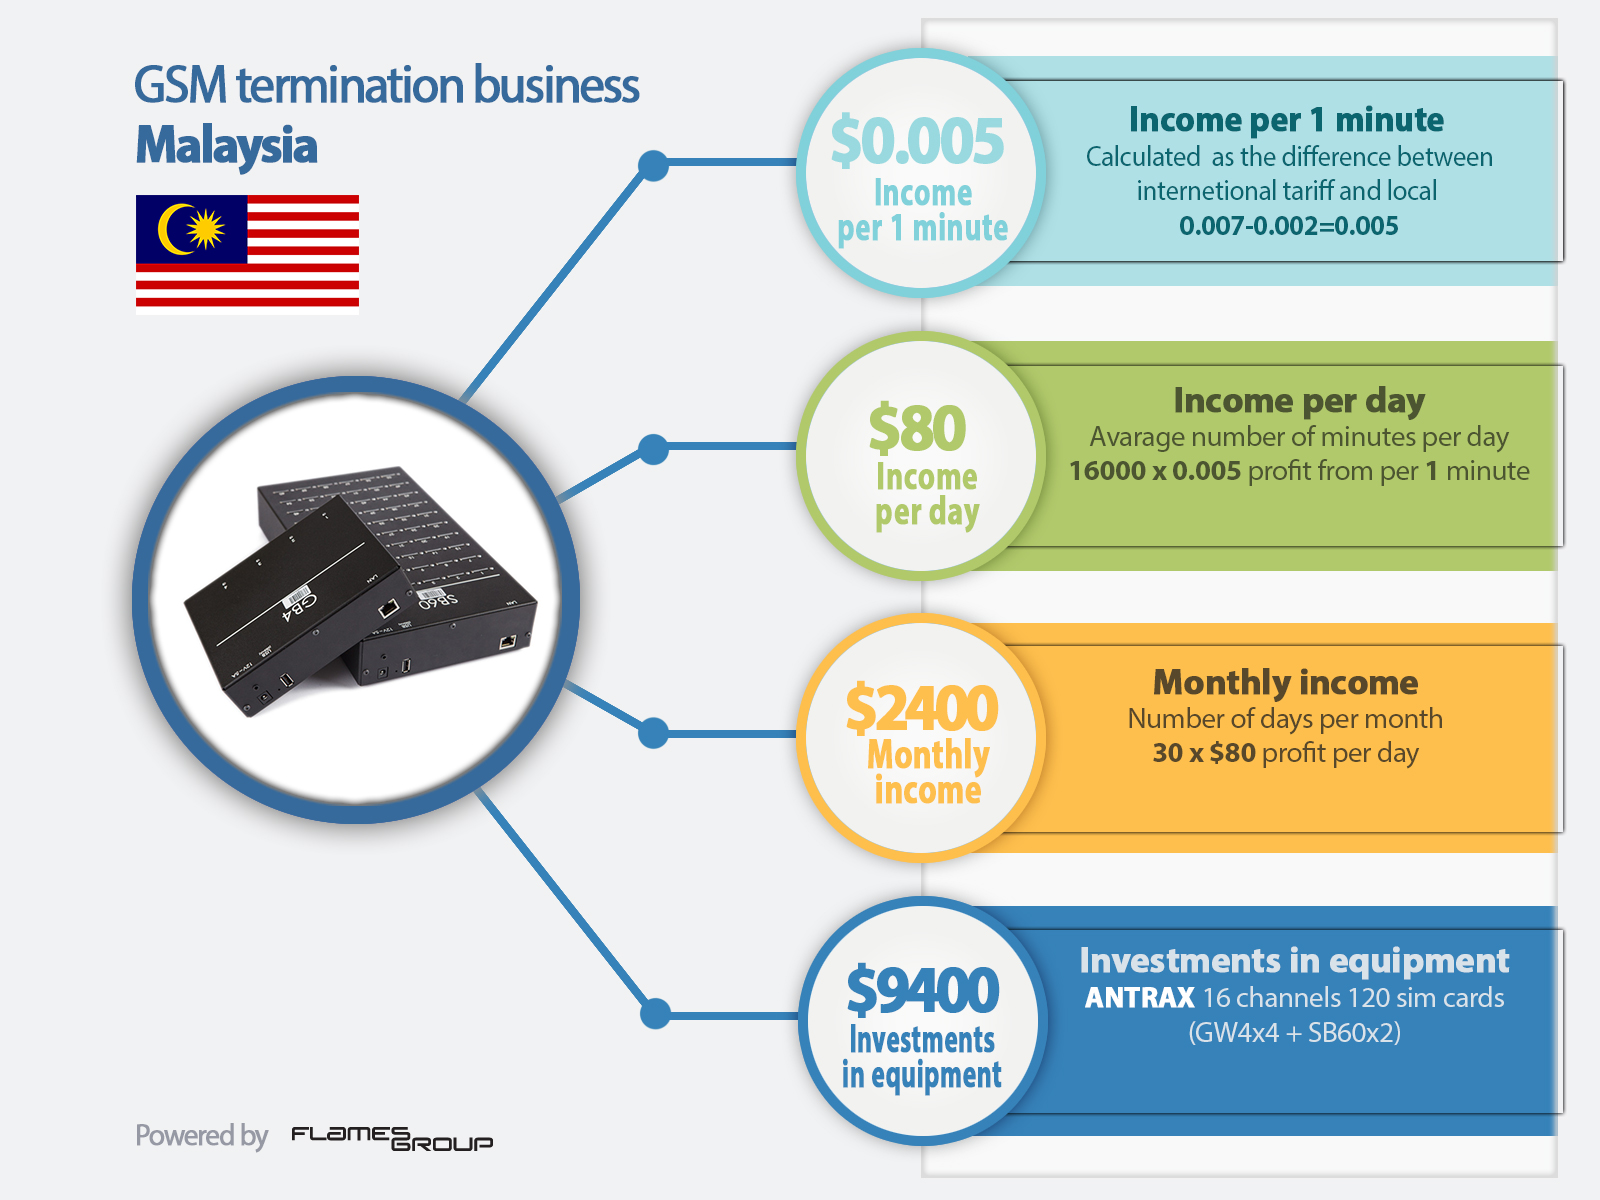 GSM termination in Malaysia - Infographic ANTRAX